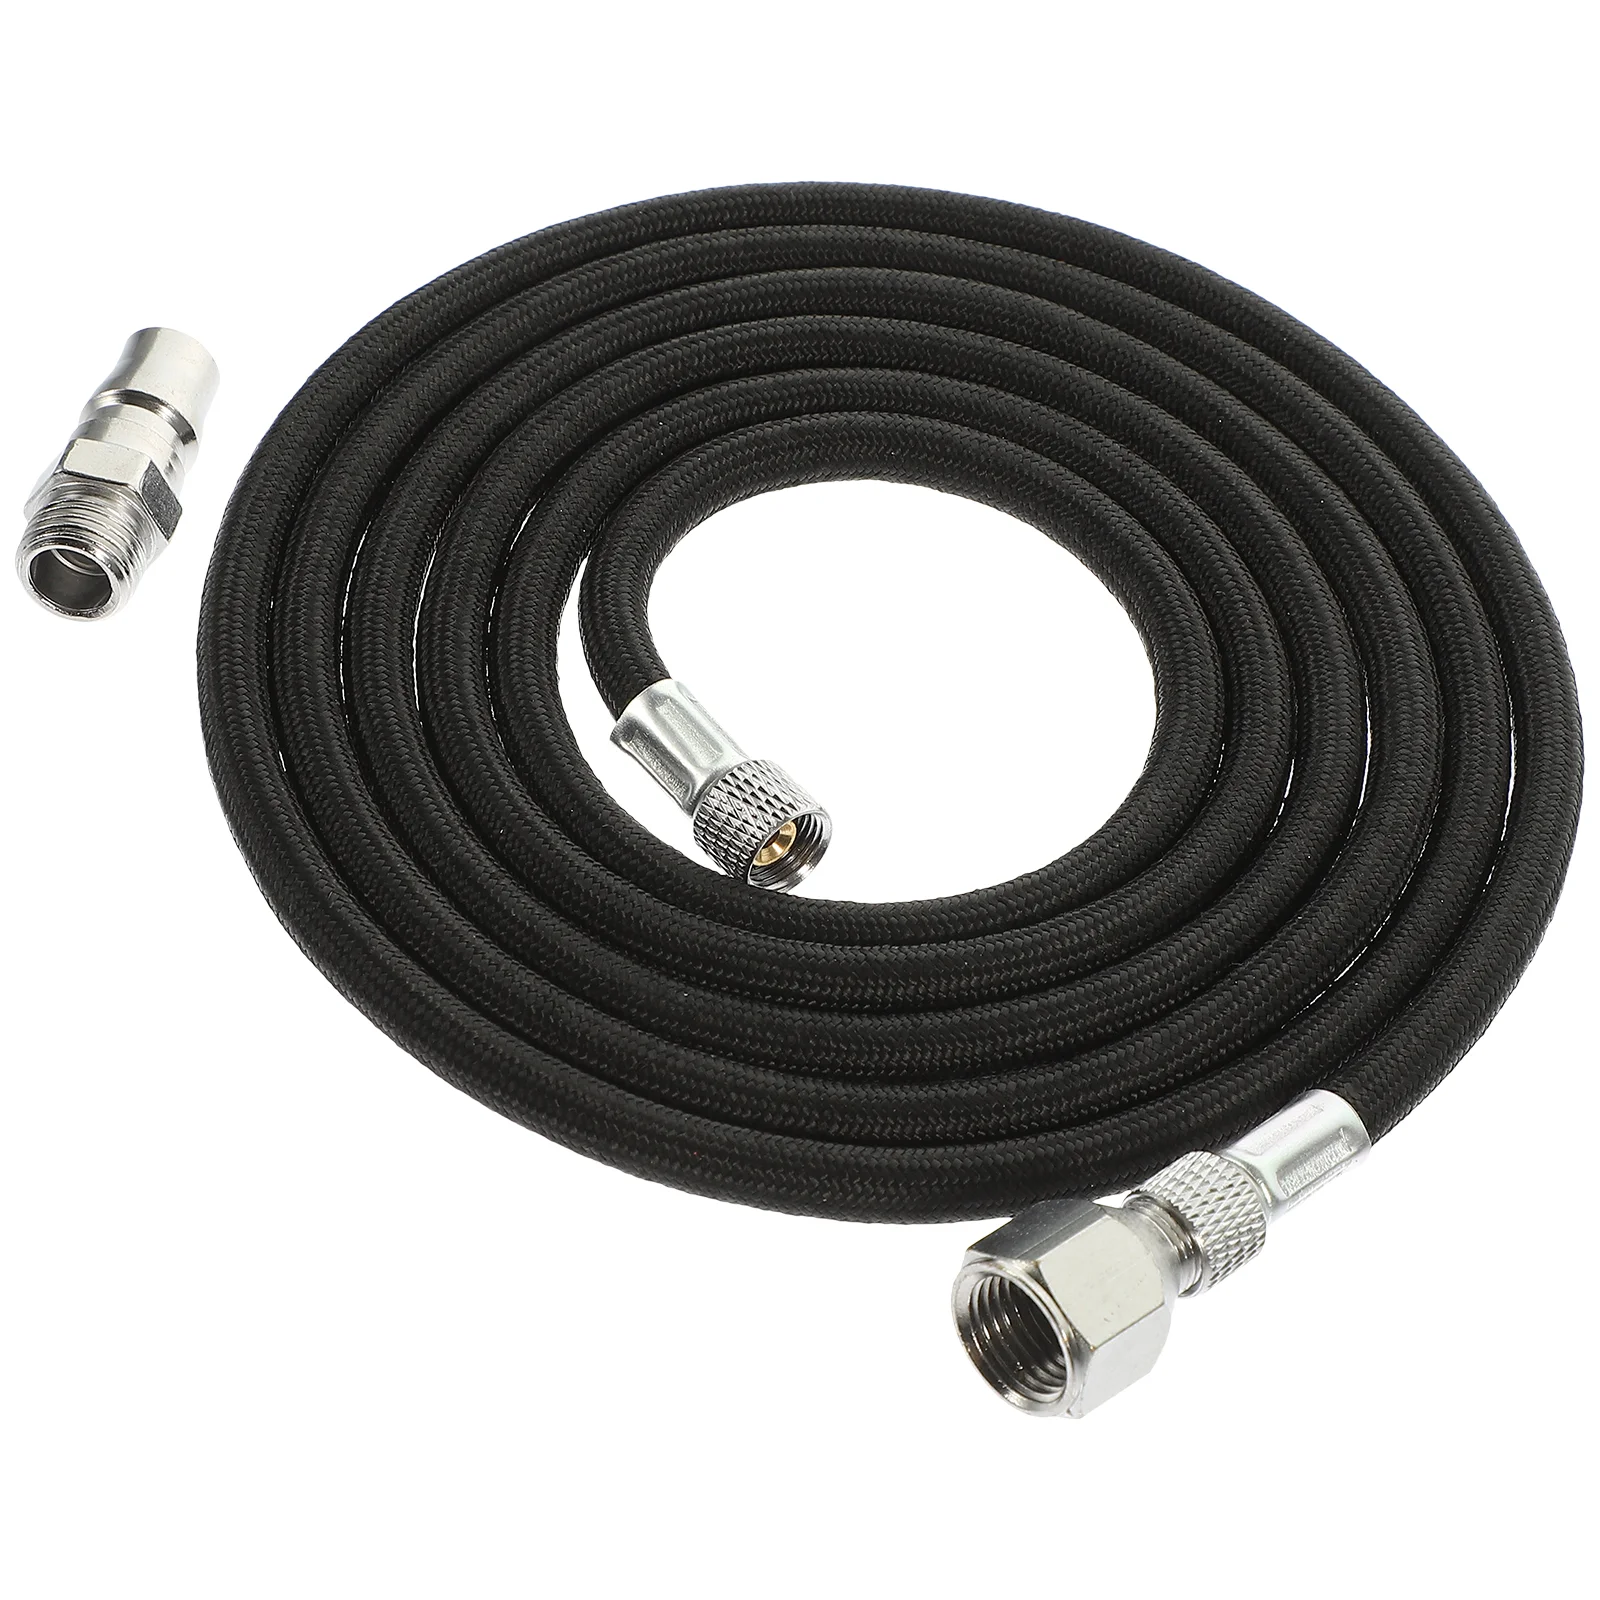 

Flexible Spraying Tube Air Compressor Tubing Hose Pipe Woven High Pressure Stretching Connector Trachea Airline